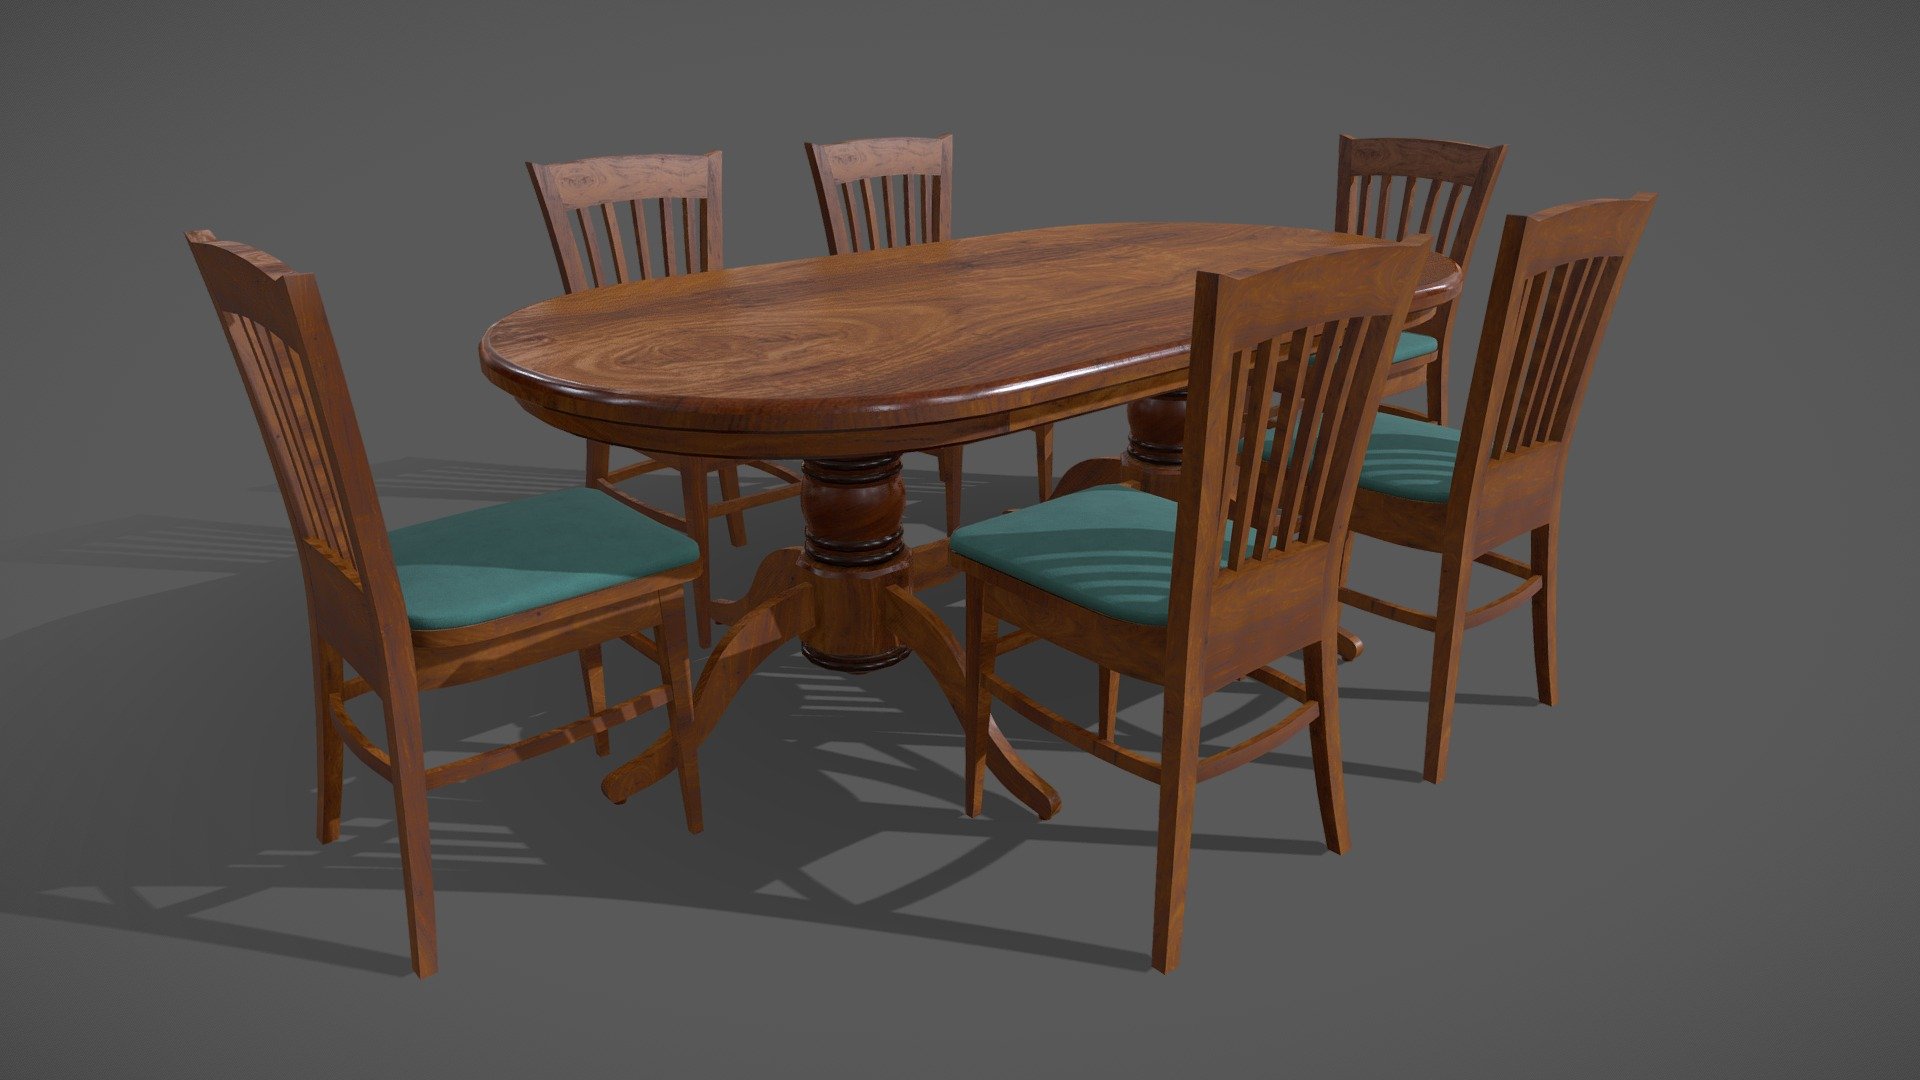 Vintage Wooden Dining Table.
Legend says food tastes much better when its served on this table.
The pack contains-
1. Fbx file
2. Textures(4k resolution)
Happy Dining :) - Dining Table (Vintage) - Buy Royalty Free 3D model by NeowLite 3d model